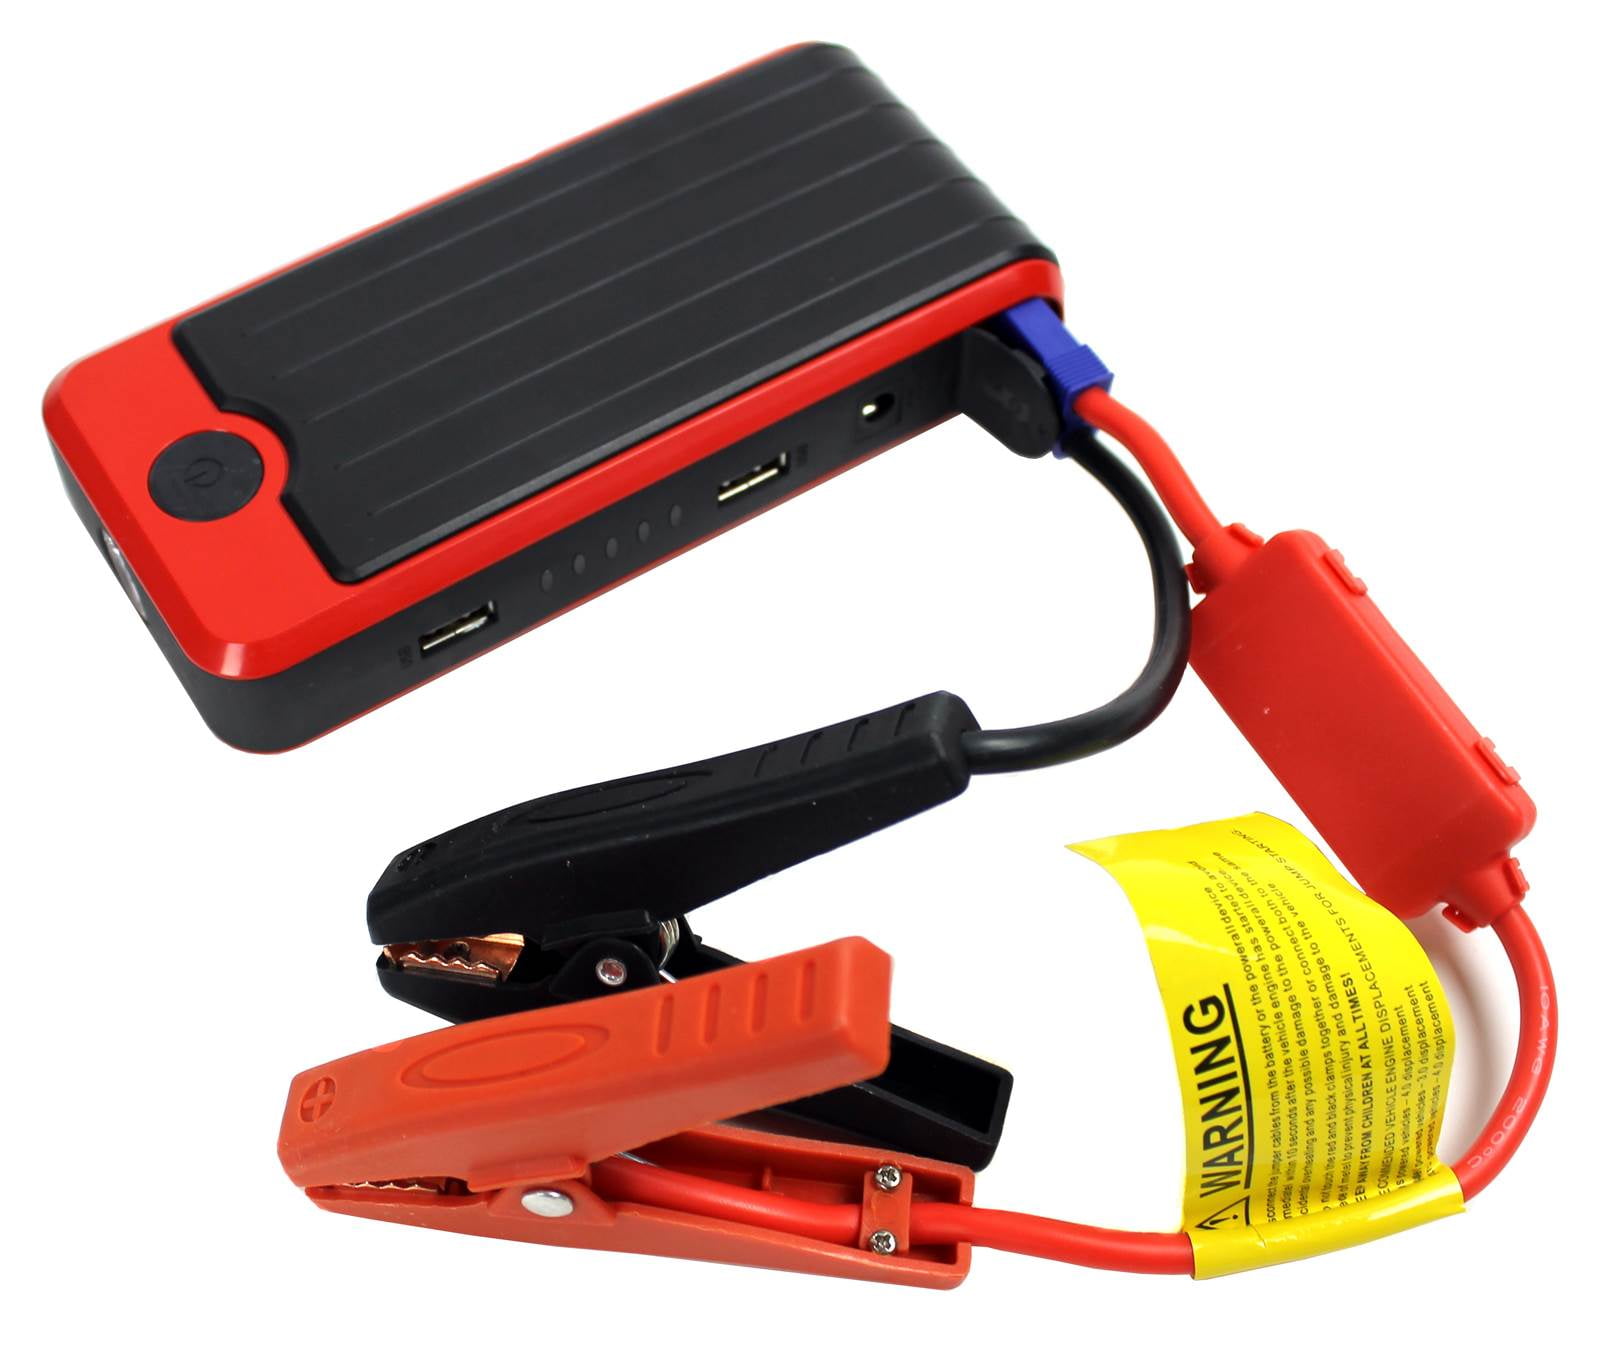 Buy the PowerAll DELUXE Jump Starter & Power Bank - 12000mAh